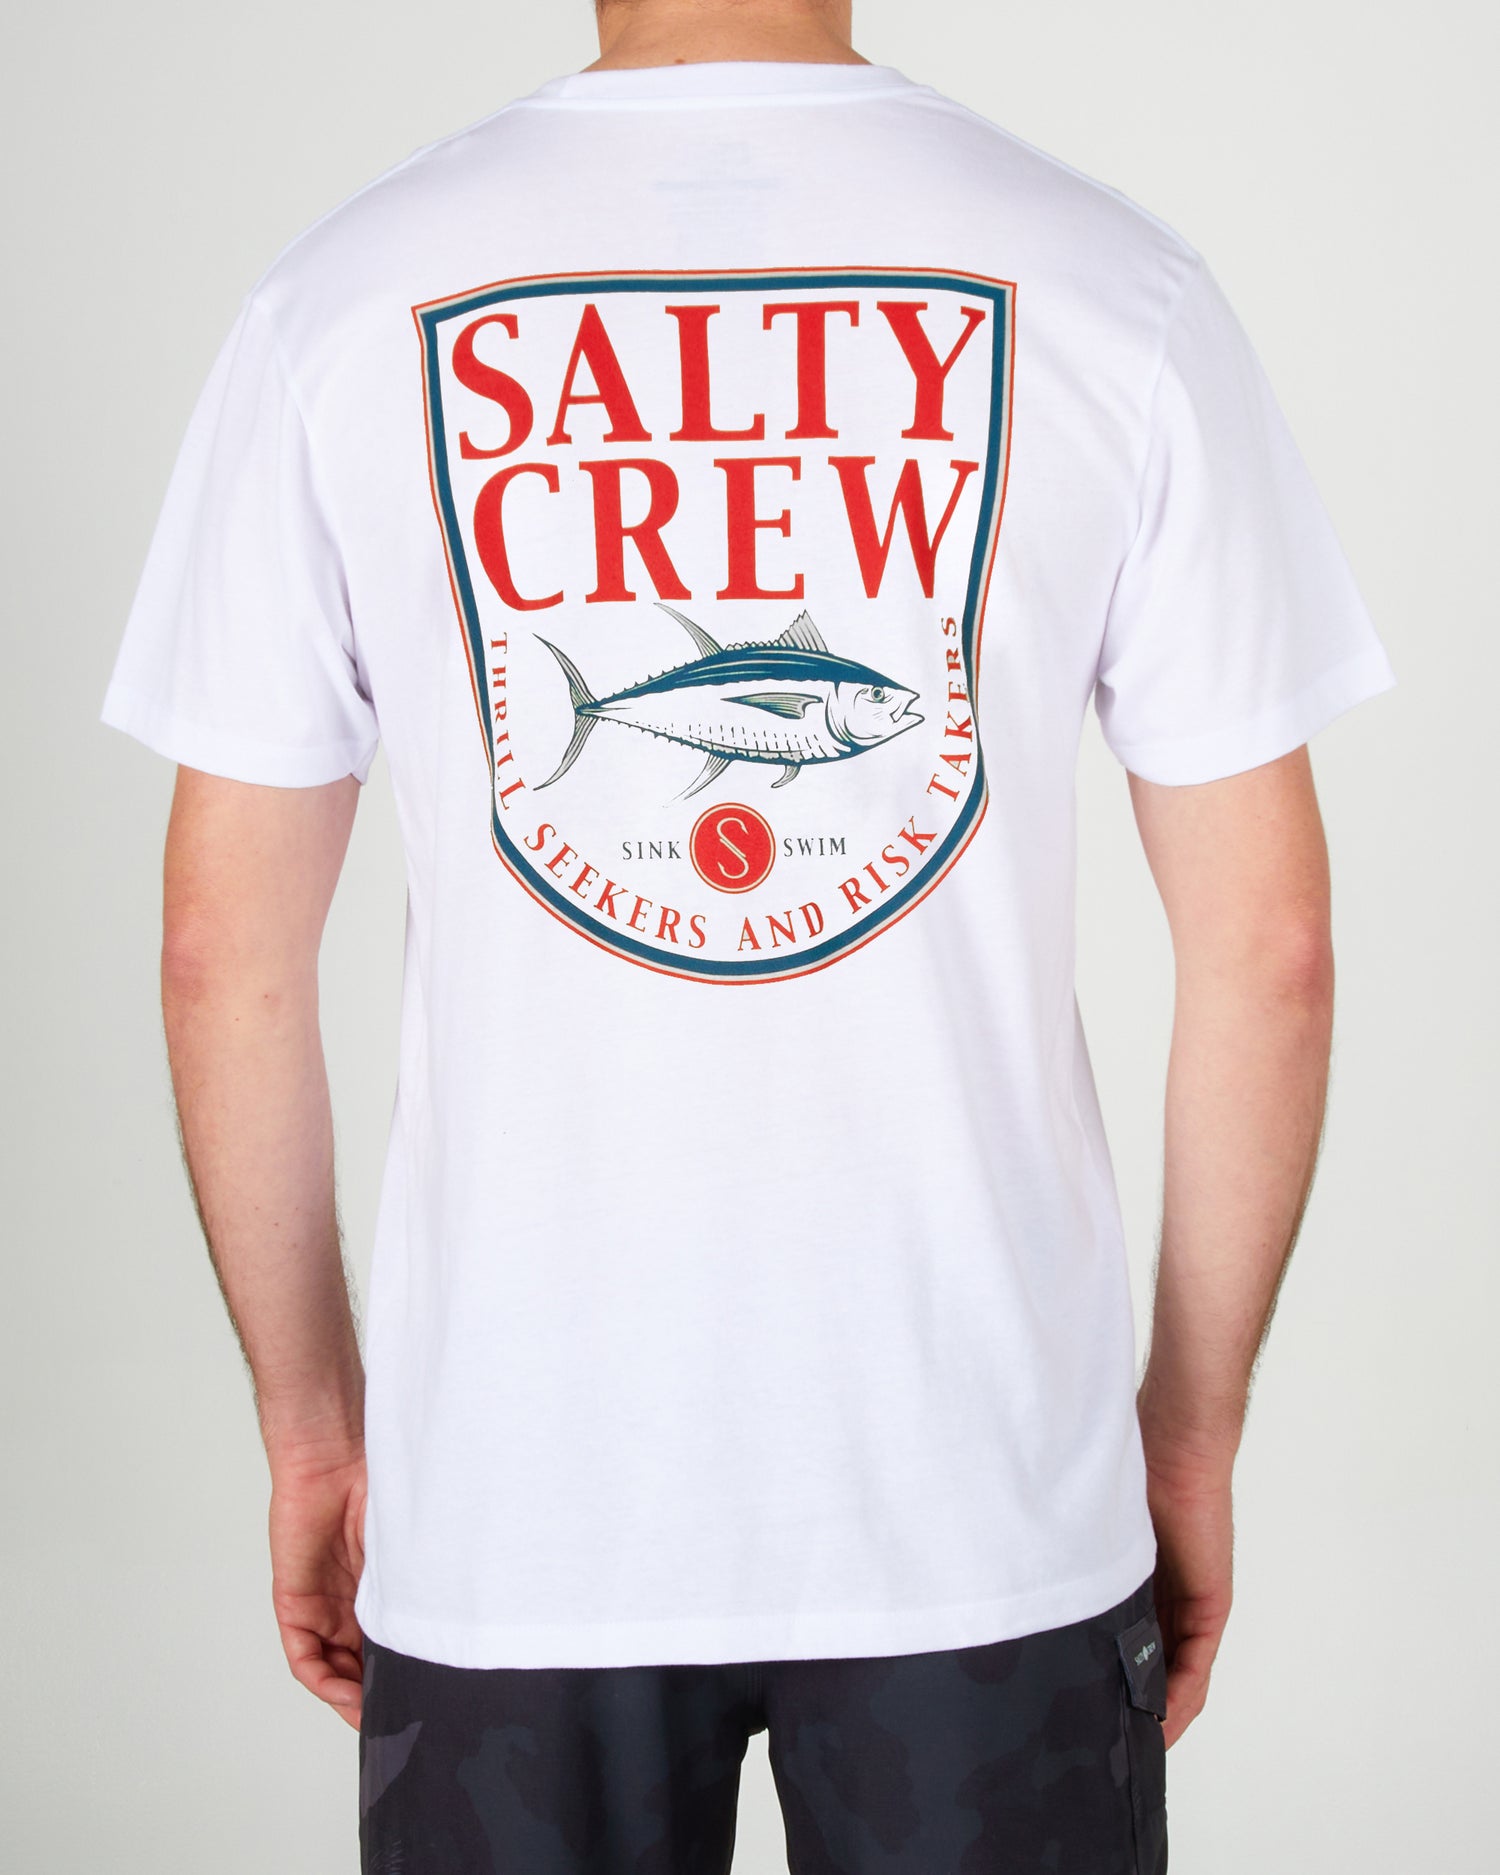 Salty Crew Current T-Shirt - White - M